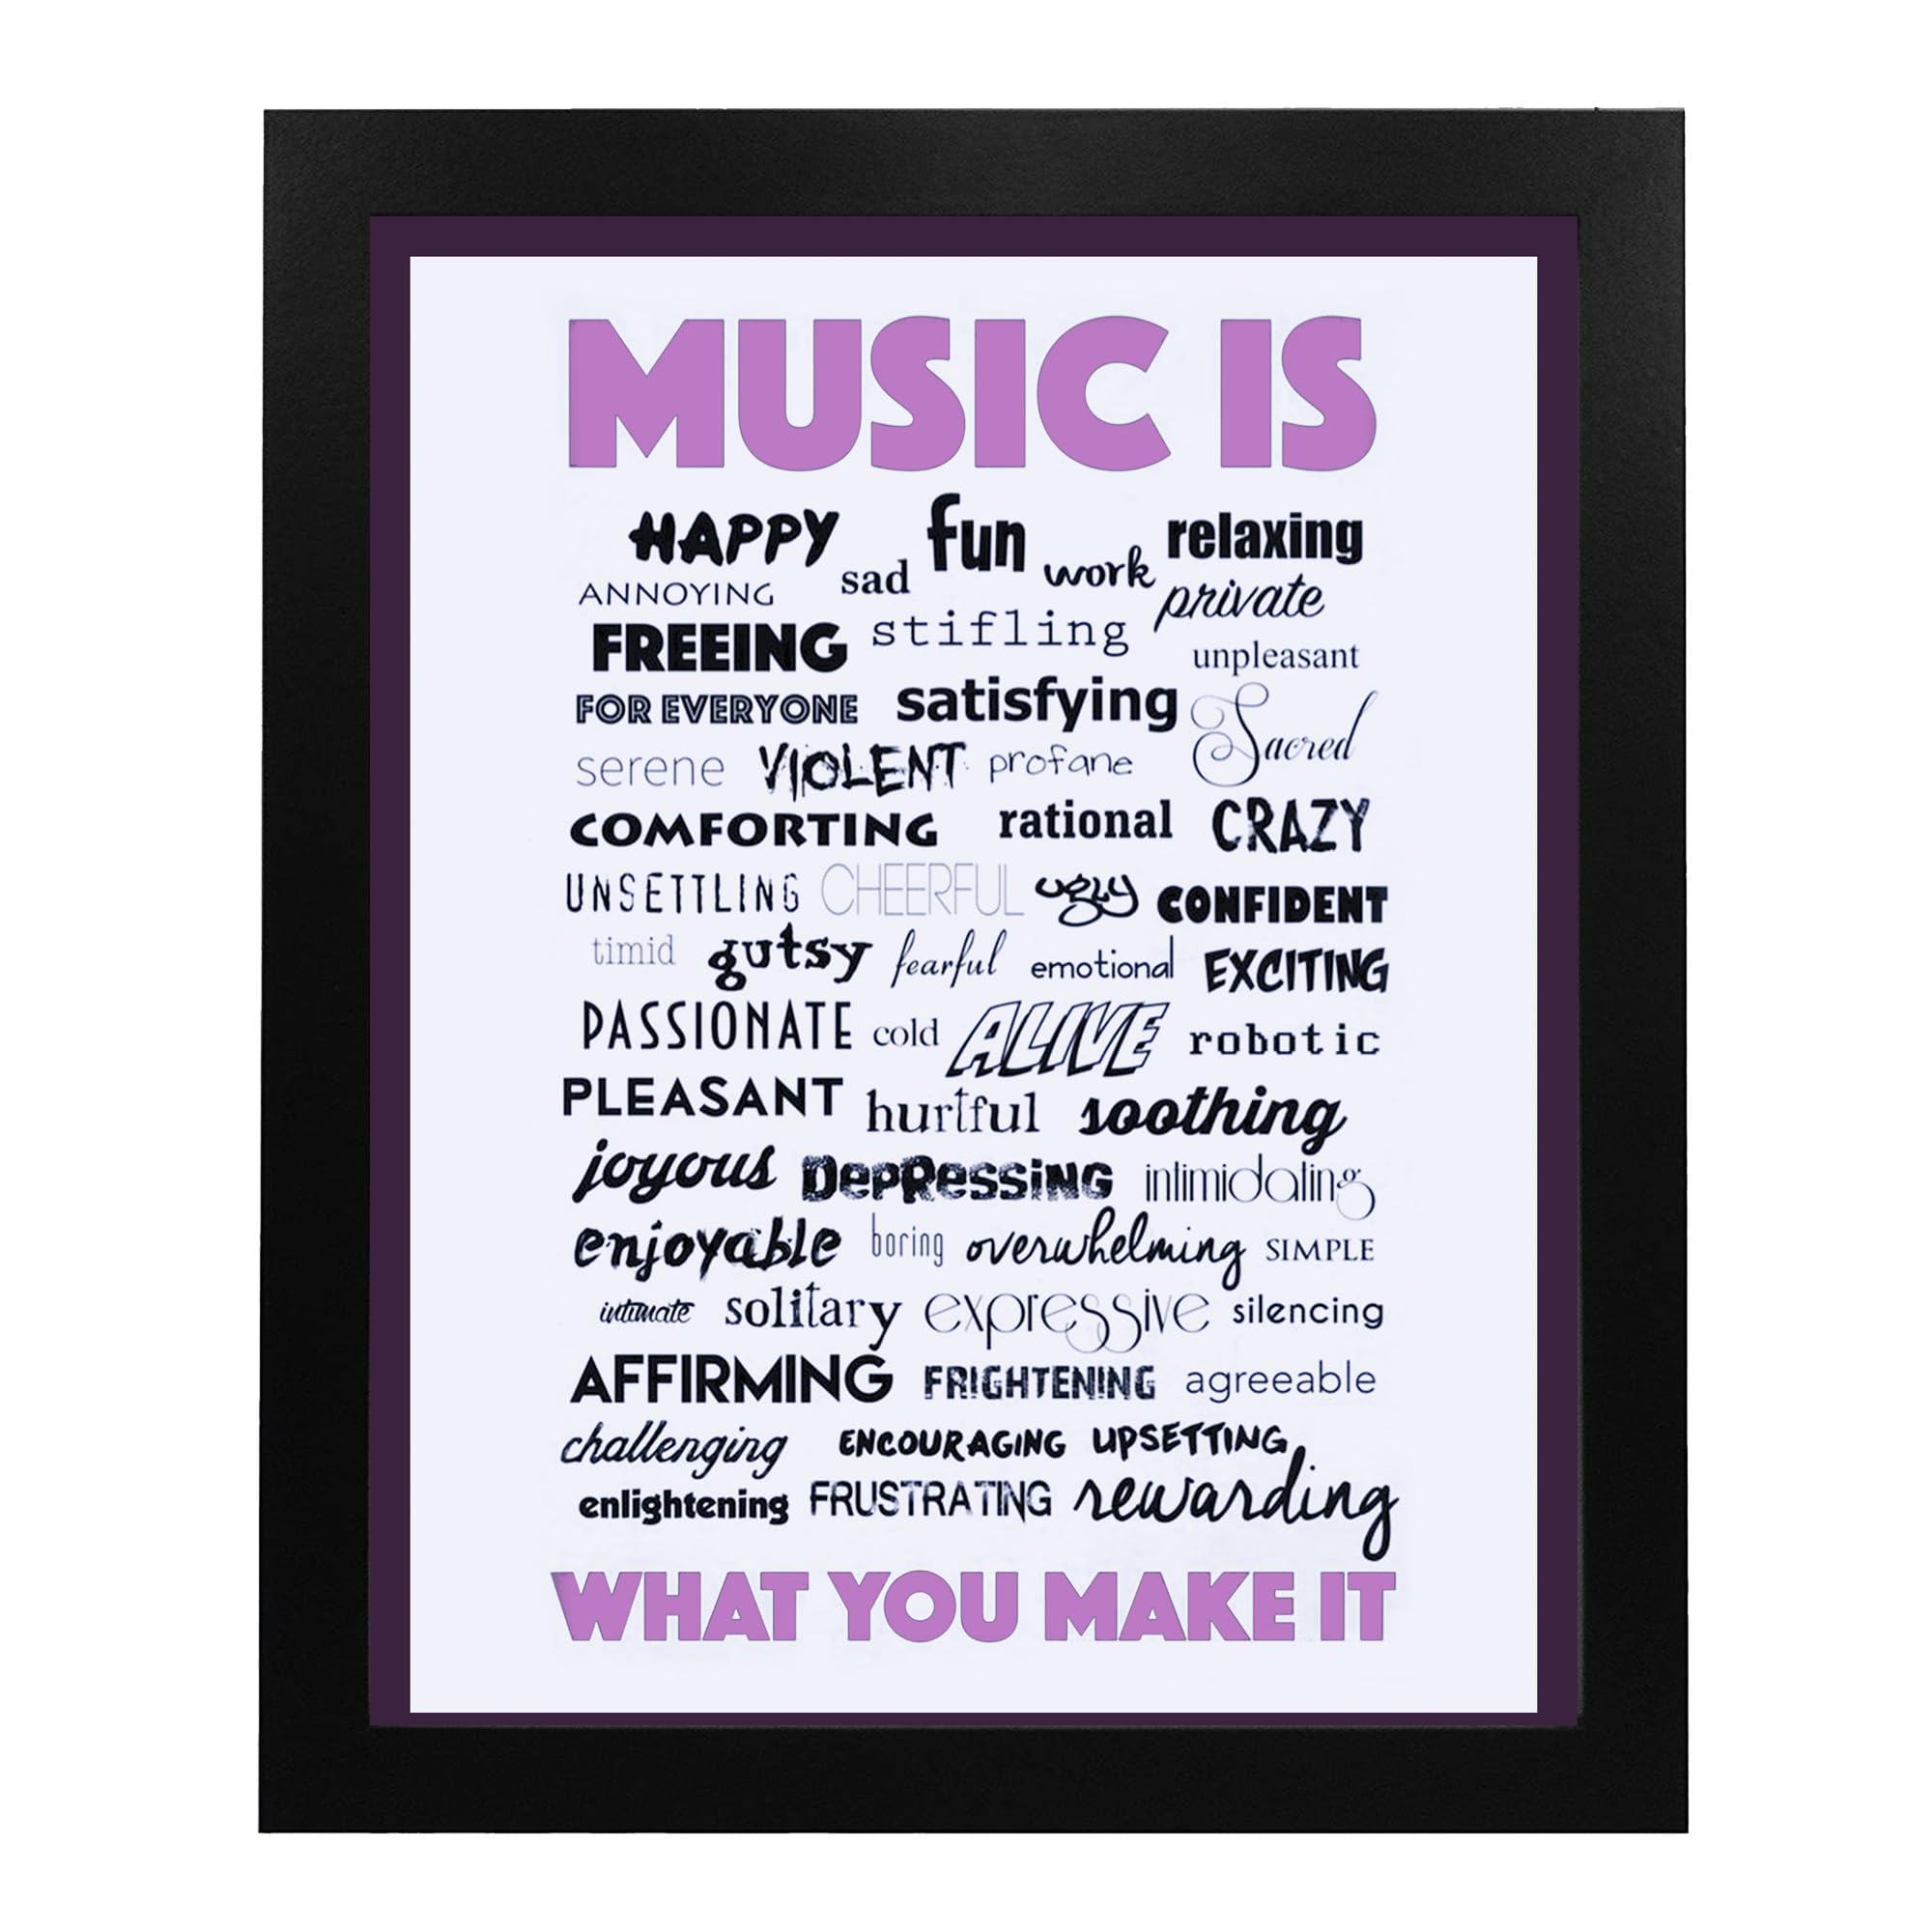 Music Is What You Make It - Inspirational Music Words Wall Art Print - Motivational Wall Art Decor For Home Decor, Office Decor, Studio & School Decor - Great Gift For Music Lovers, Unframed - 11x14"